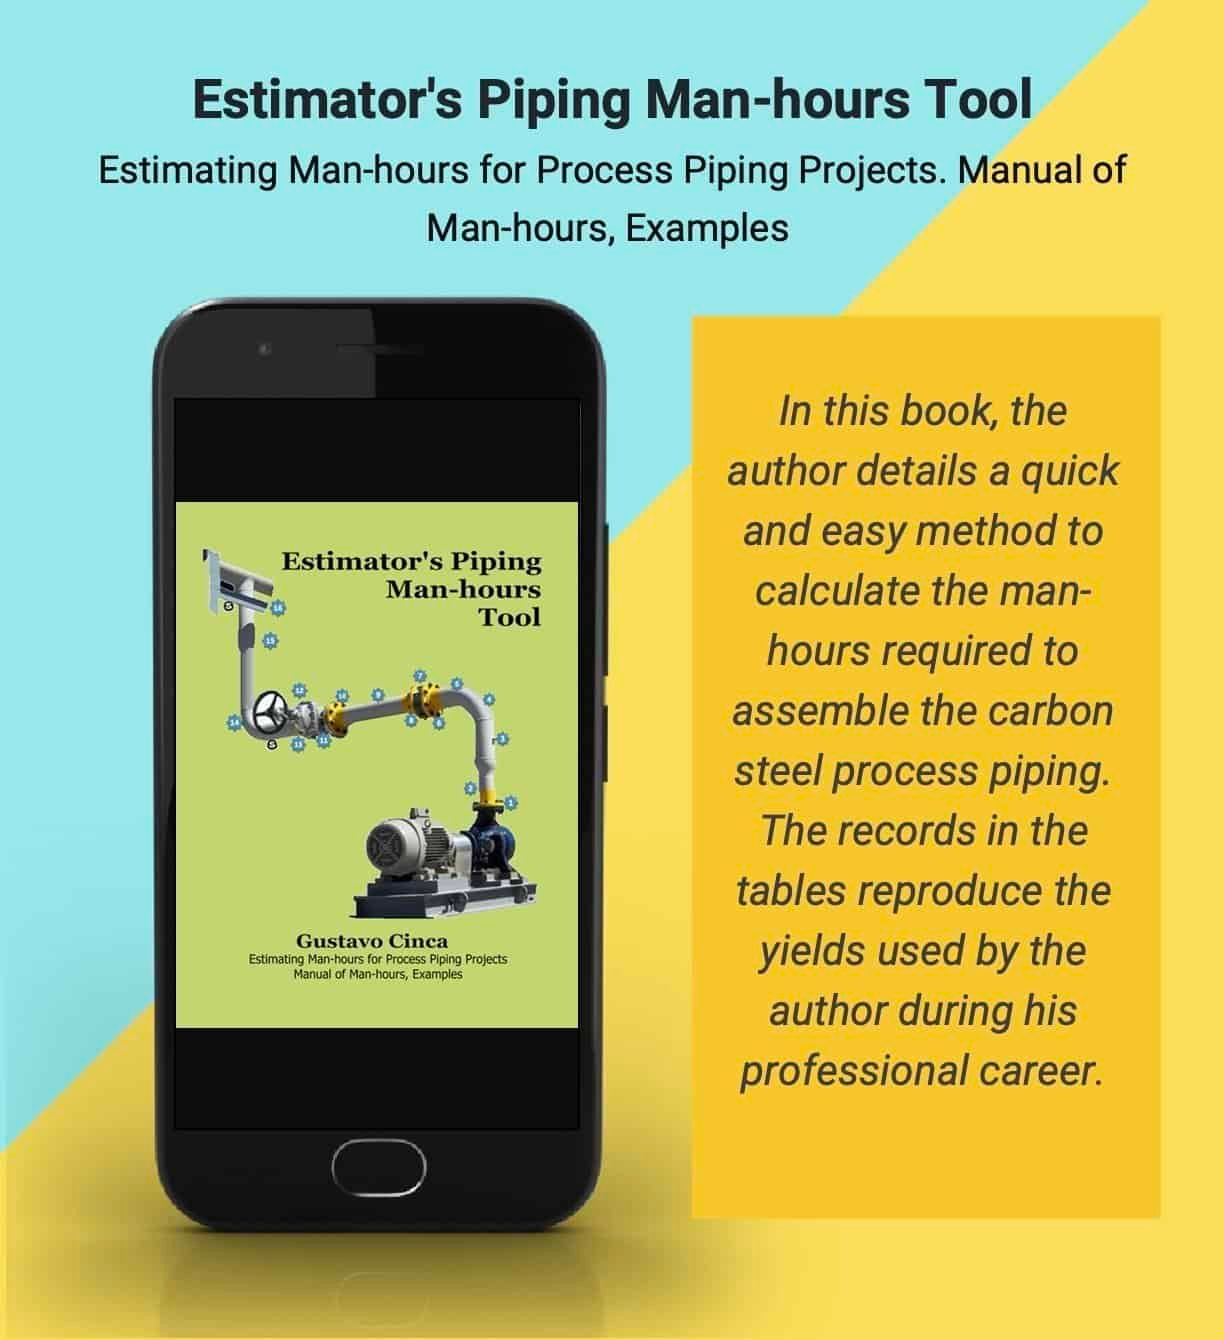 The figure displays a booklet with the cover and a brief description of the book: Estimator's Piping Man-hours Tool. Gustavo Cinca Books